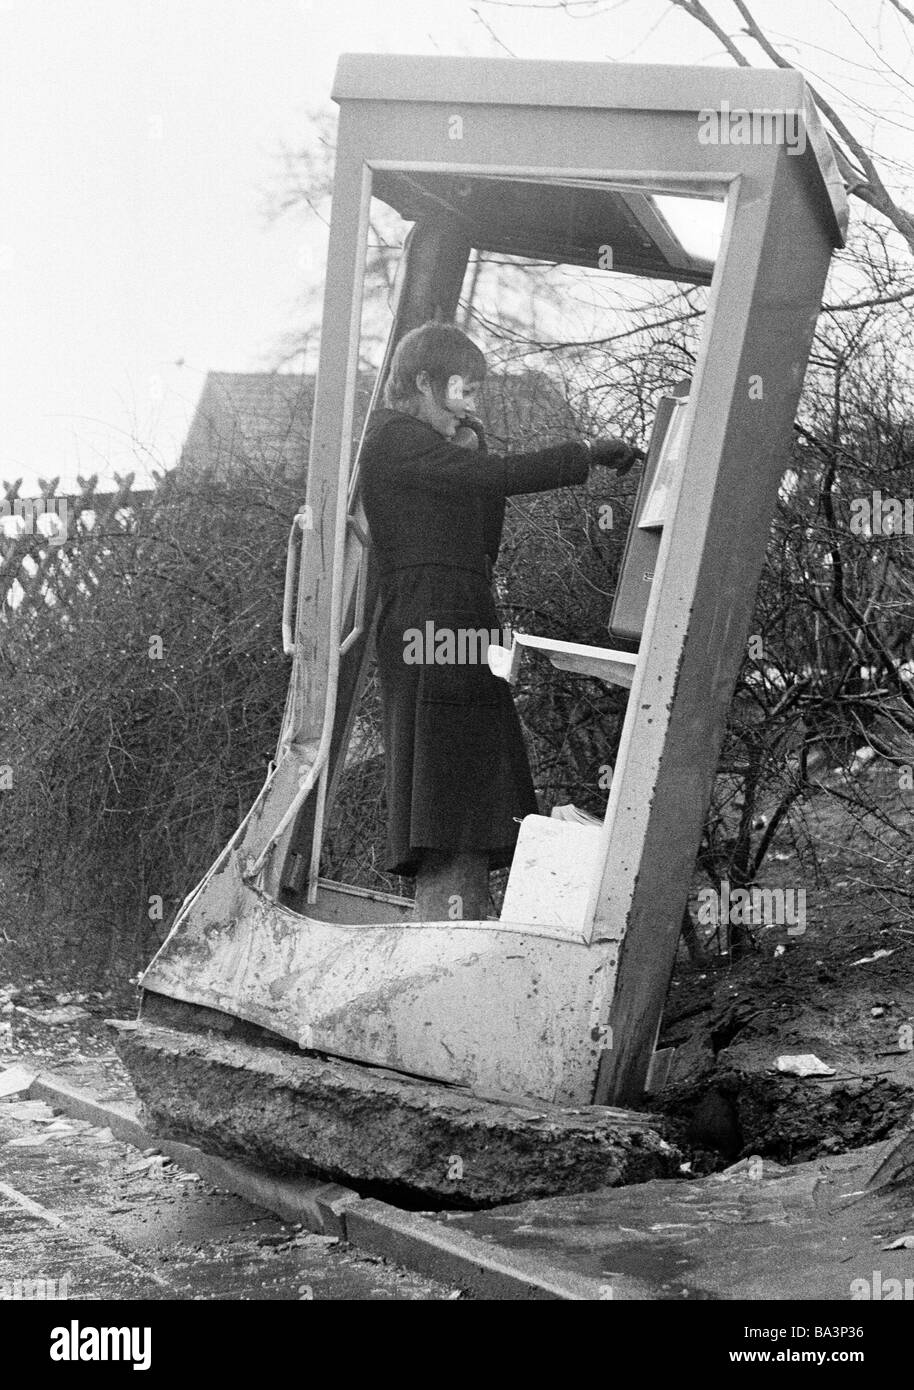 Seventies, black and white photo, humour, people, telephone box was destroyed and pulled out of the ground together with the basement, young woman stands in the callbox and 'makes a phone call', aged 20 to 25 years, Monika Stock Photo